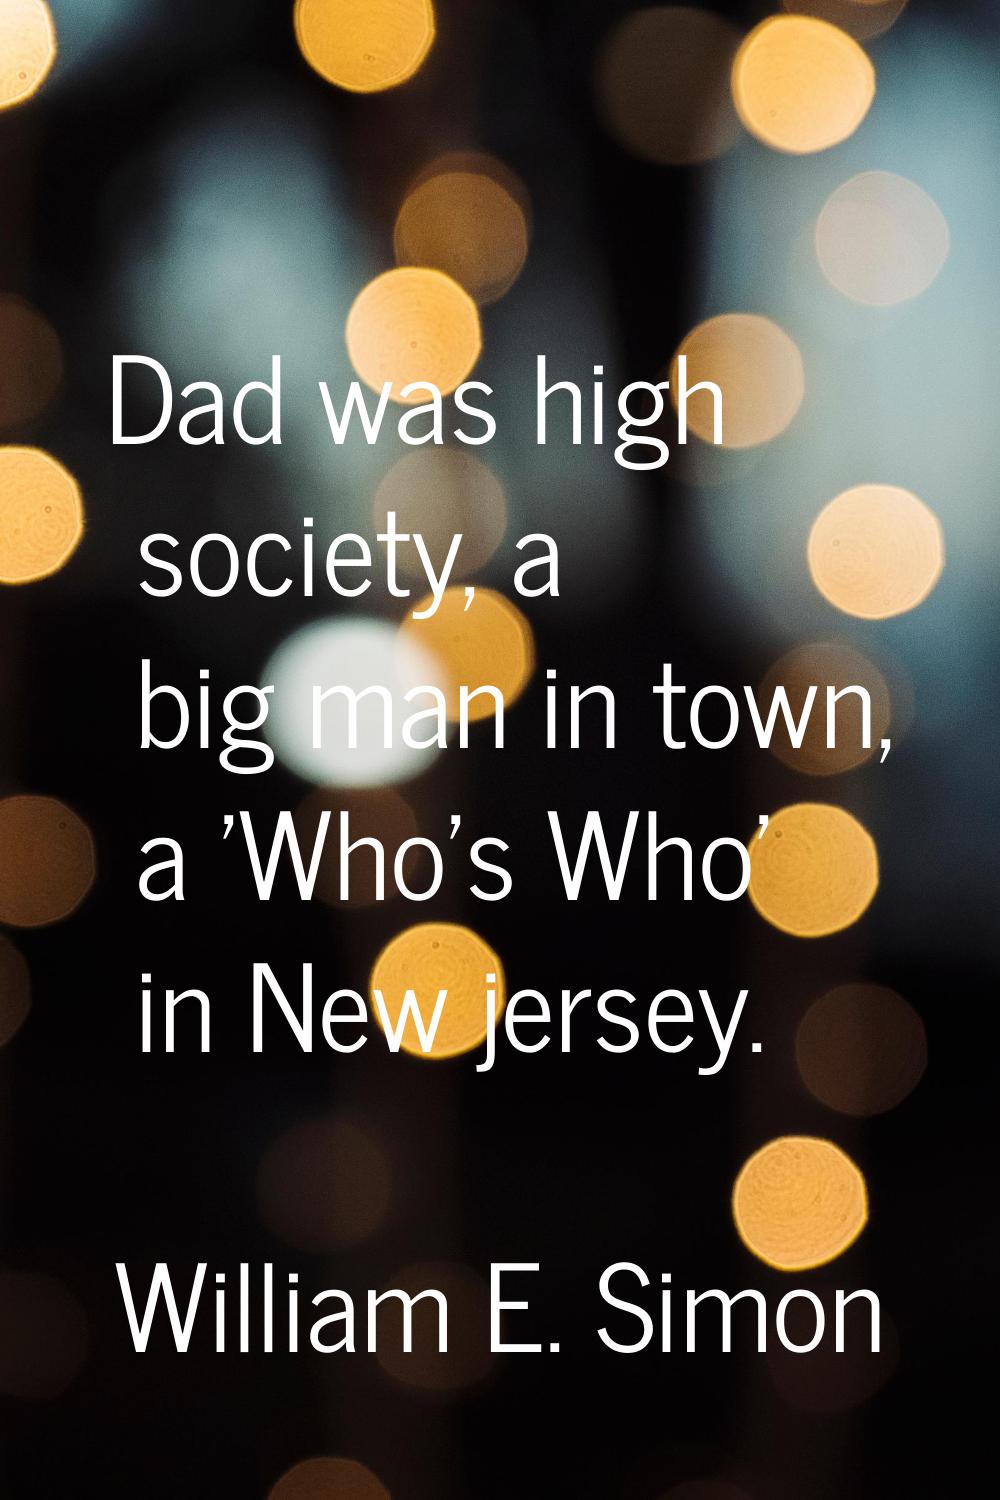 Dad was high society, a big man in town, a 'Who's Who' in New jersey.